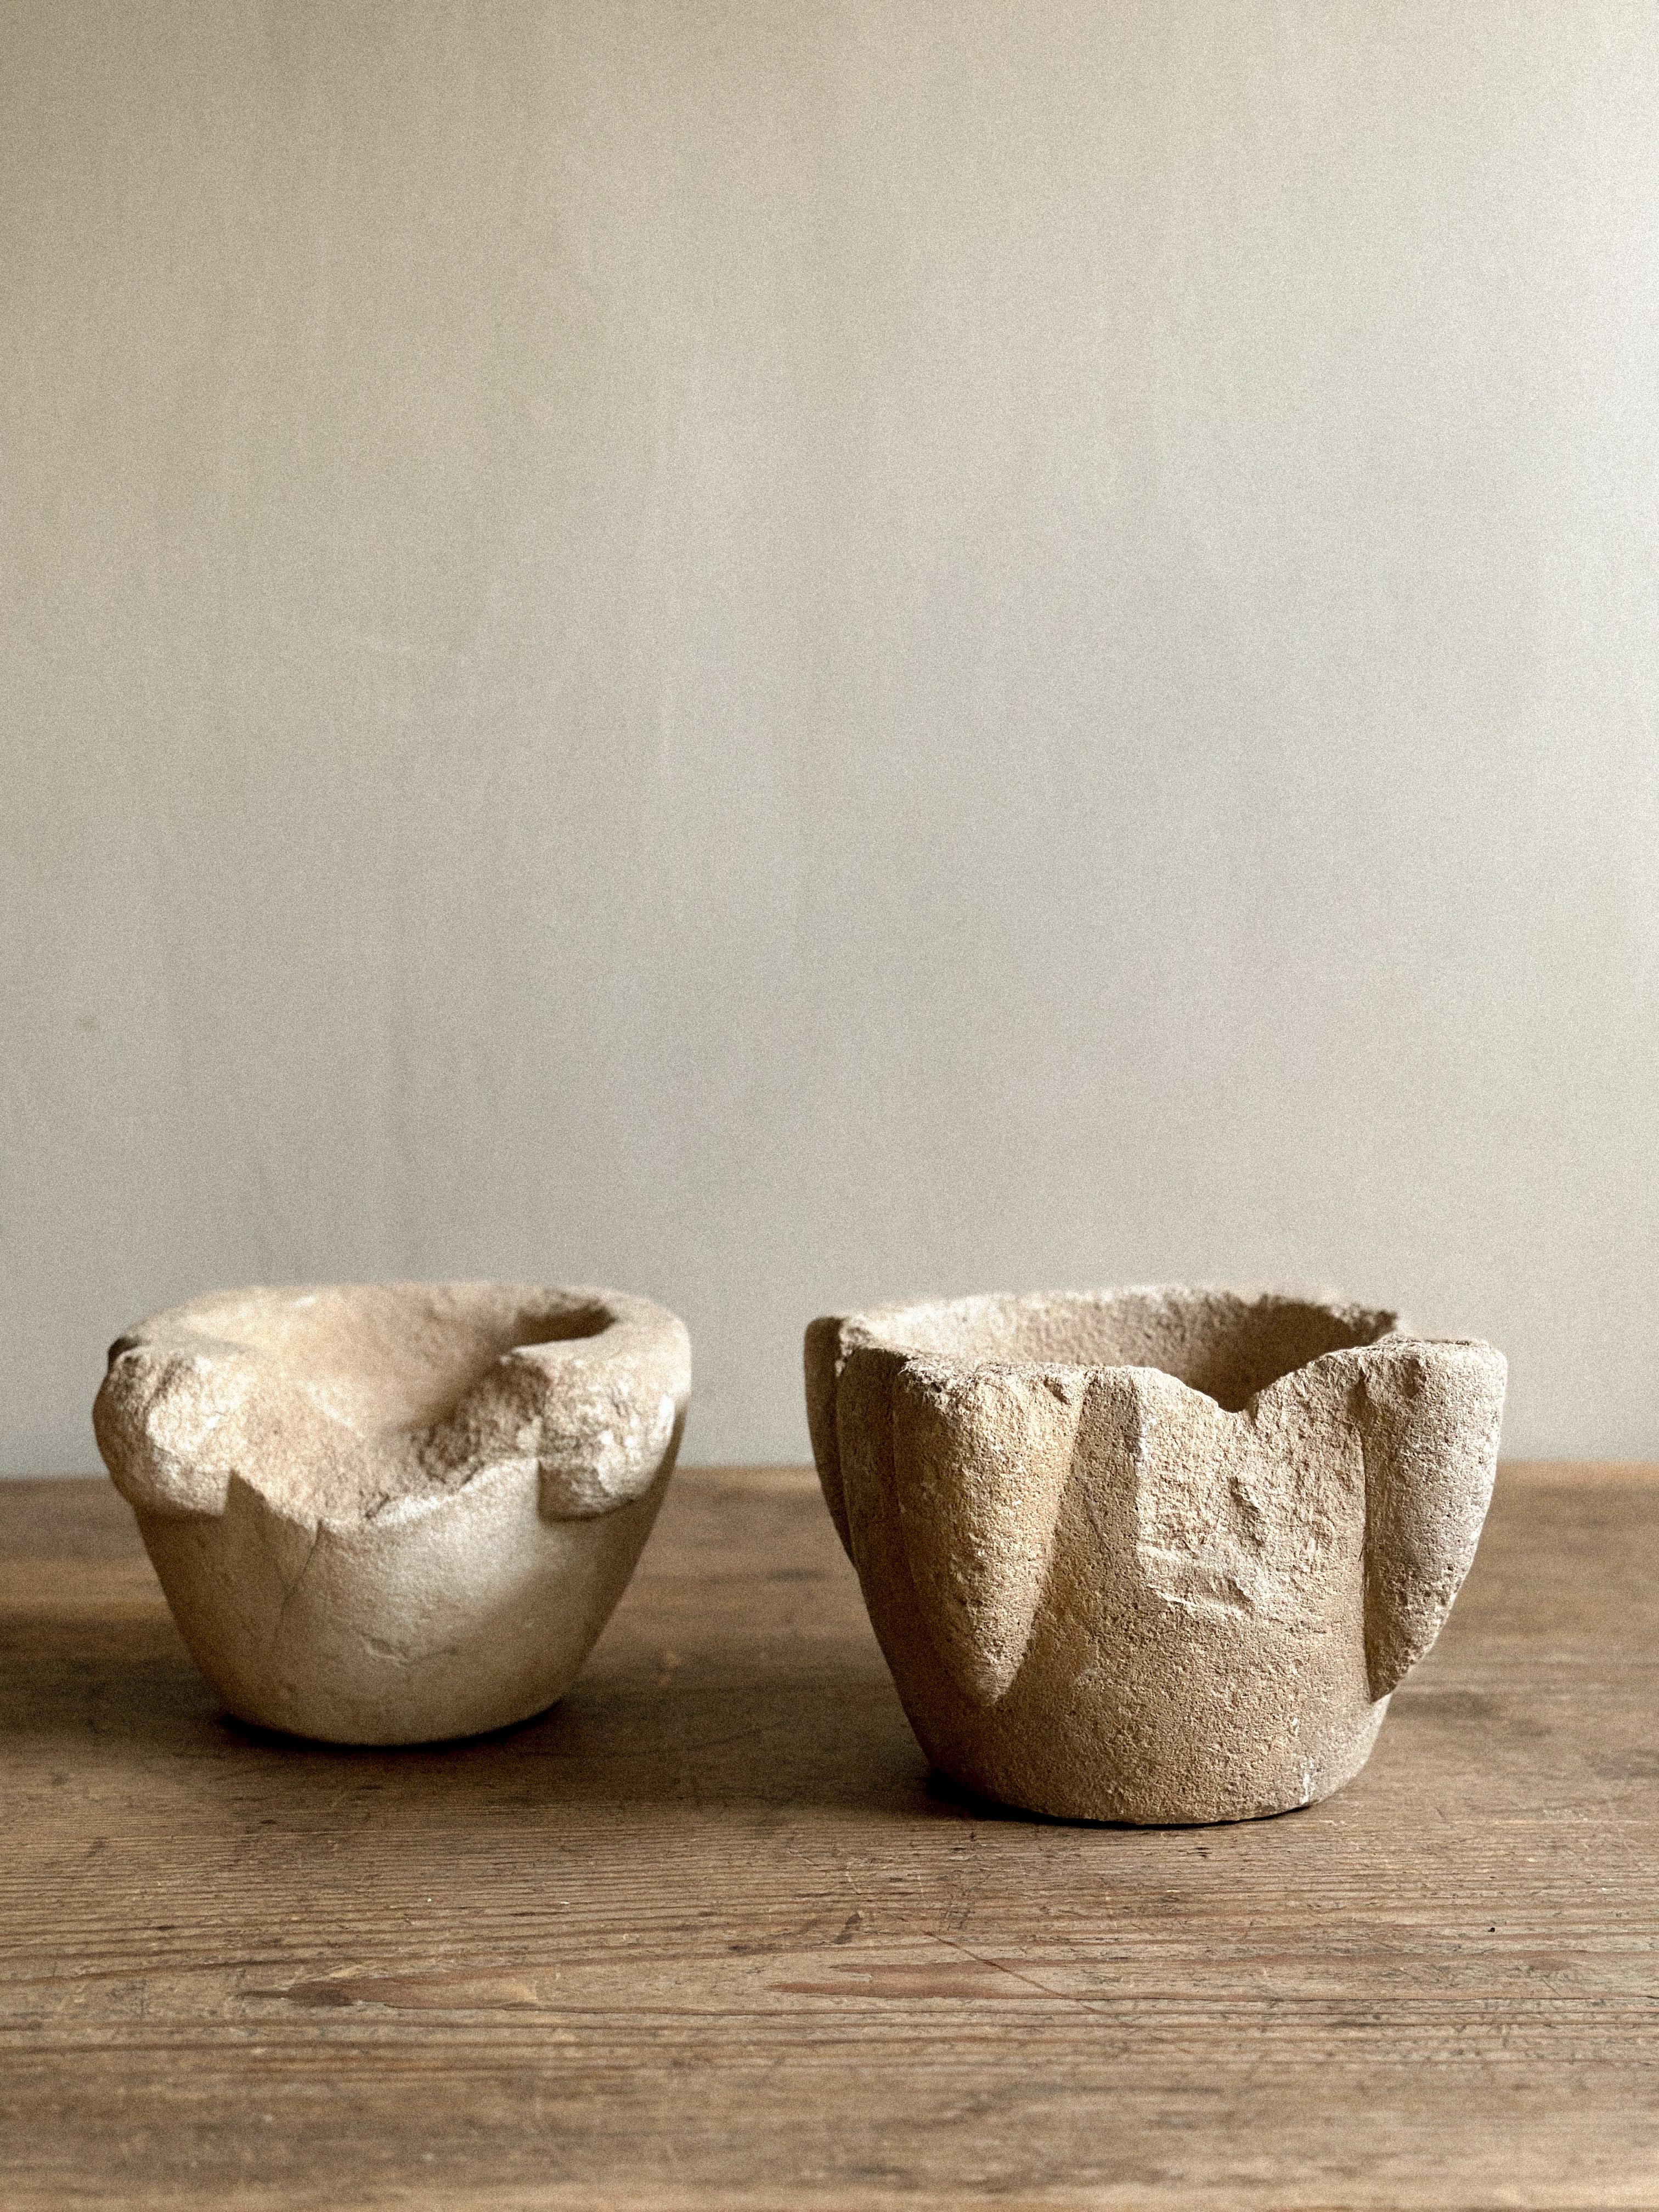 A Duo of Primitive Wabi Sabi Hand-Carved Stone Mortars, Spain, Early 1900s For Sale 6